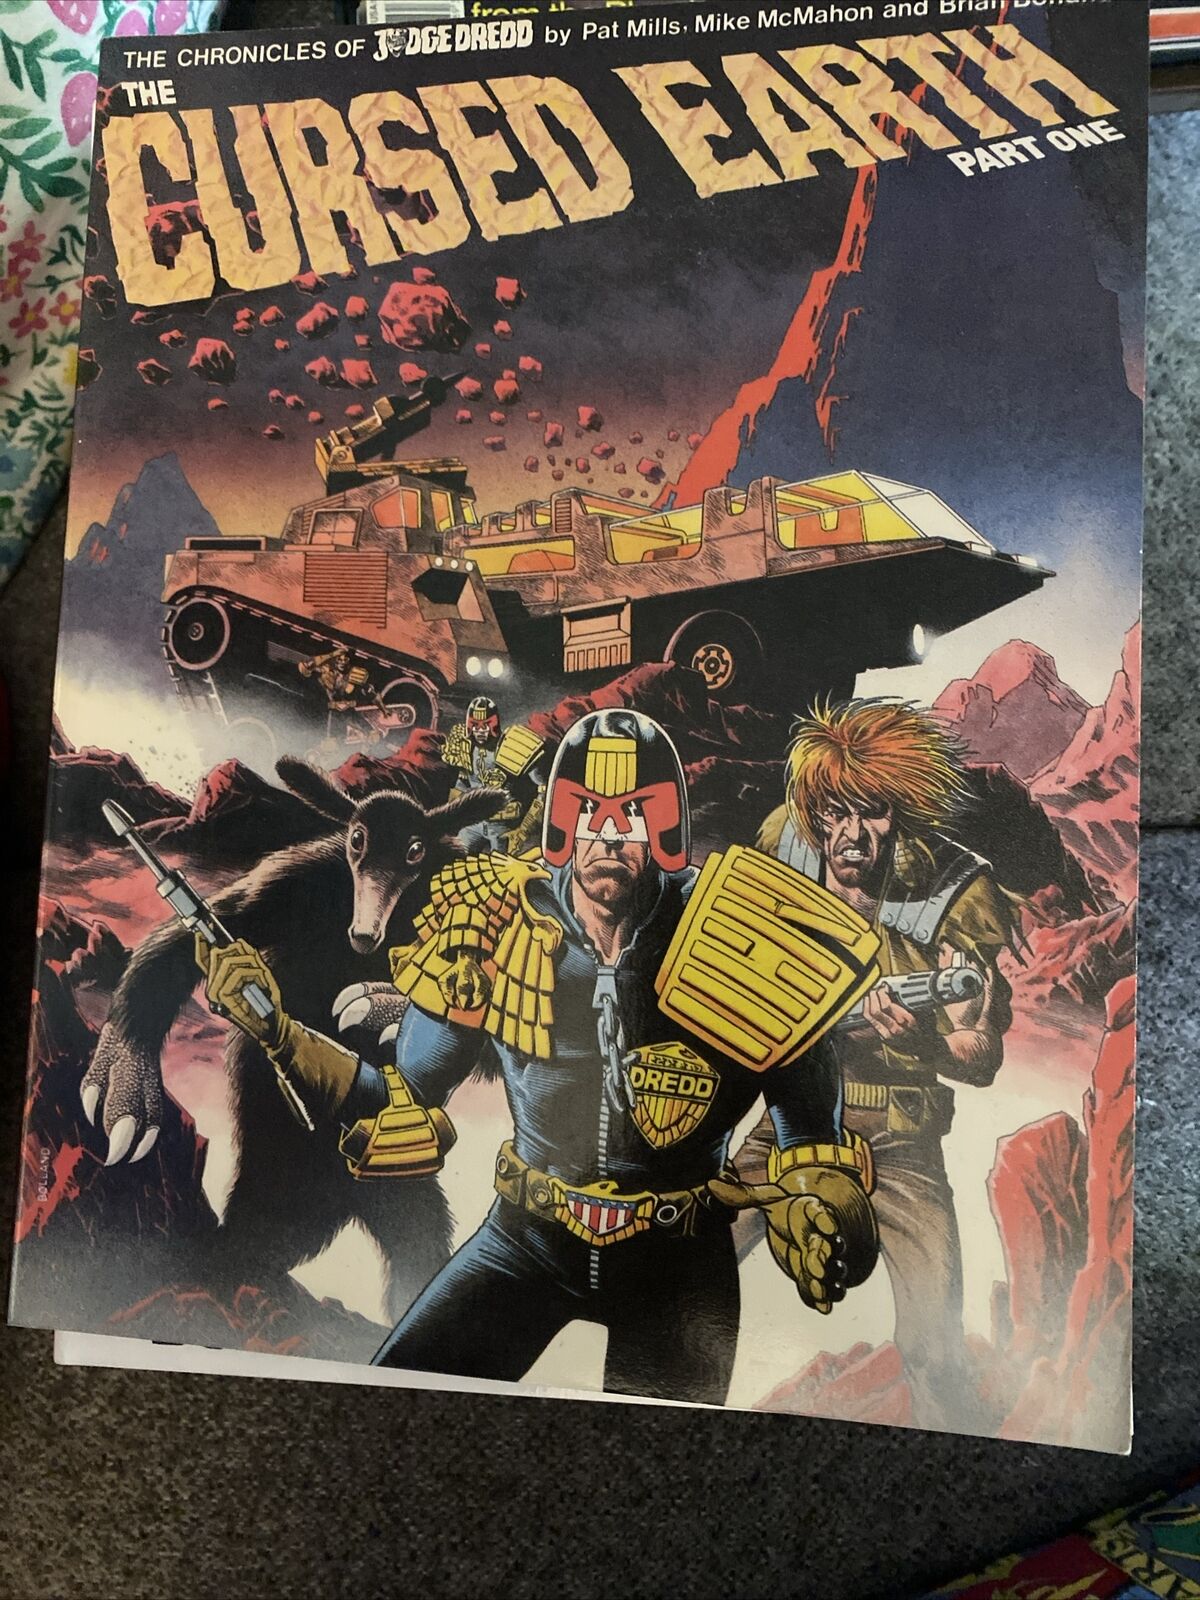 The Cursed Earth The Chronicles of Judge Dredd Paperback